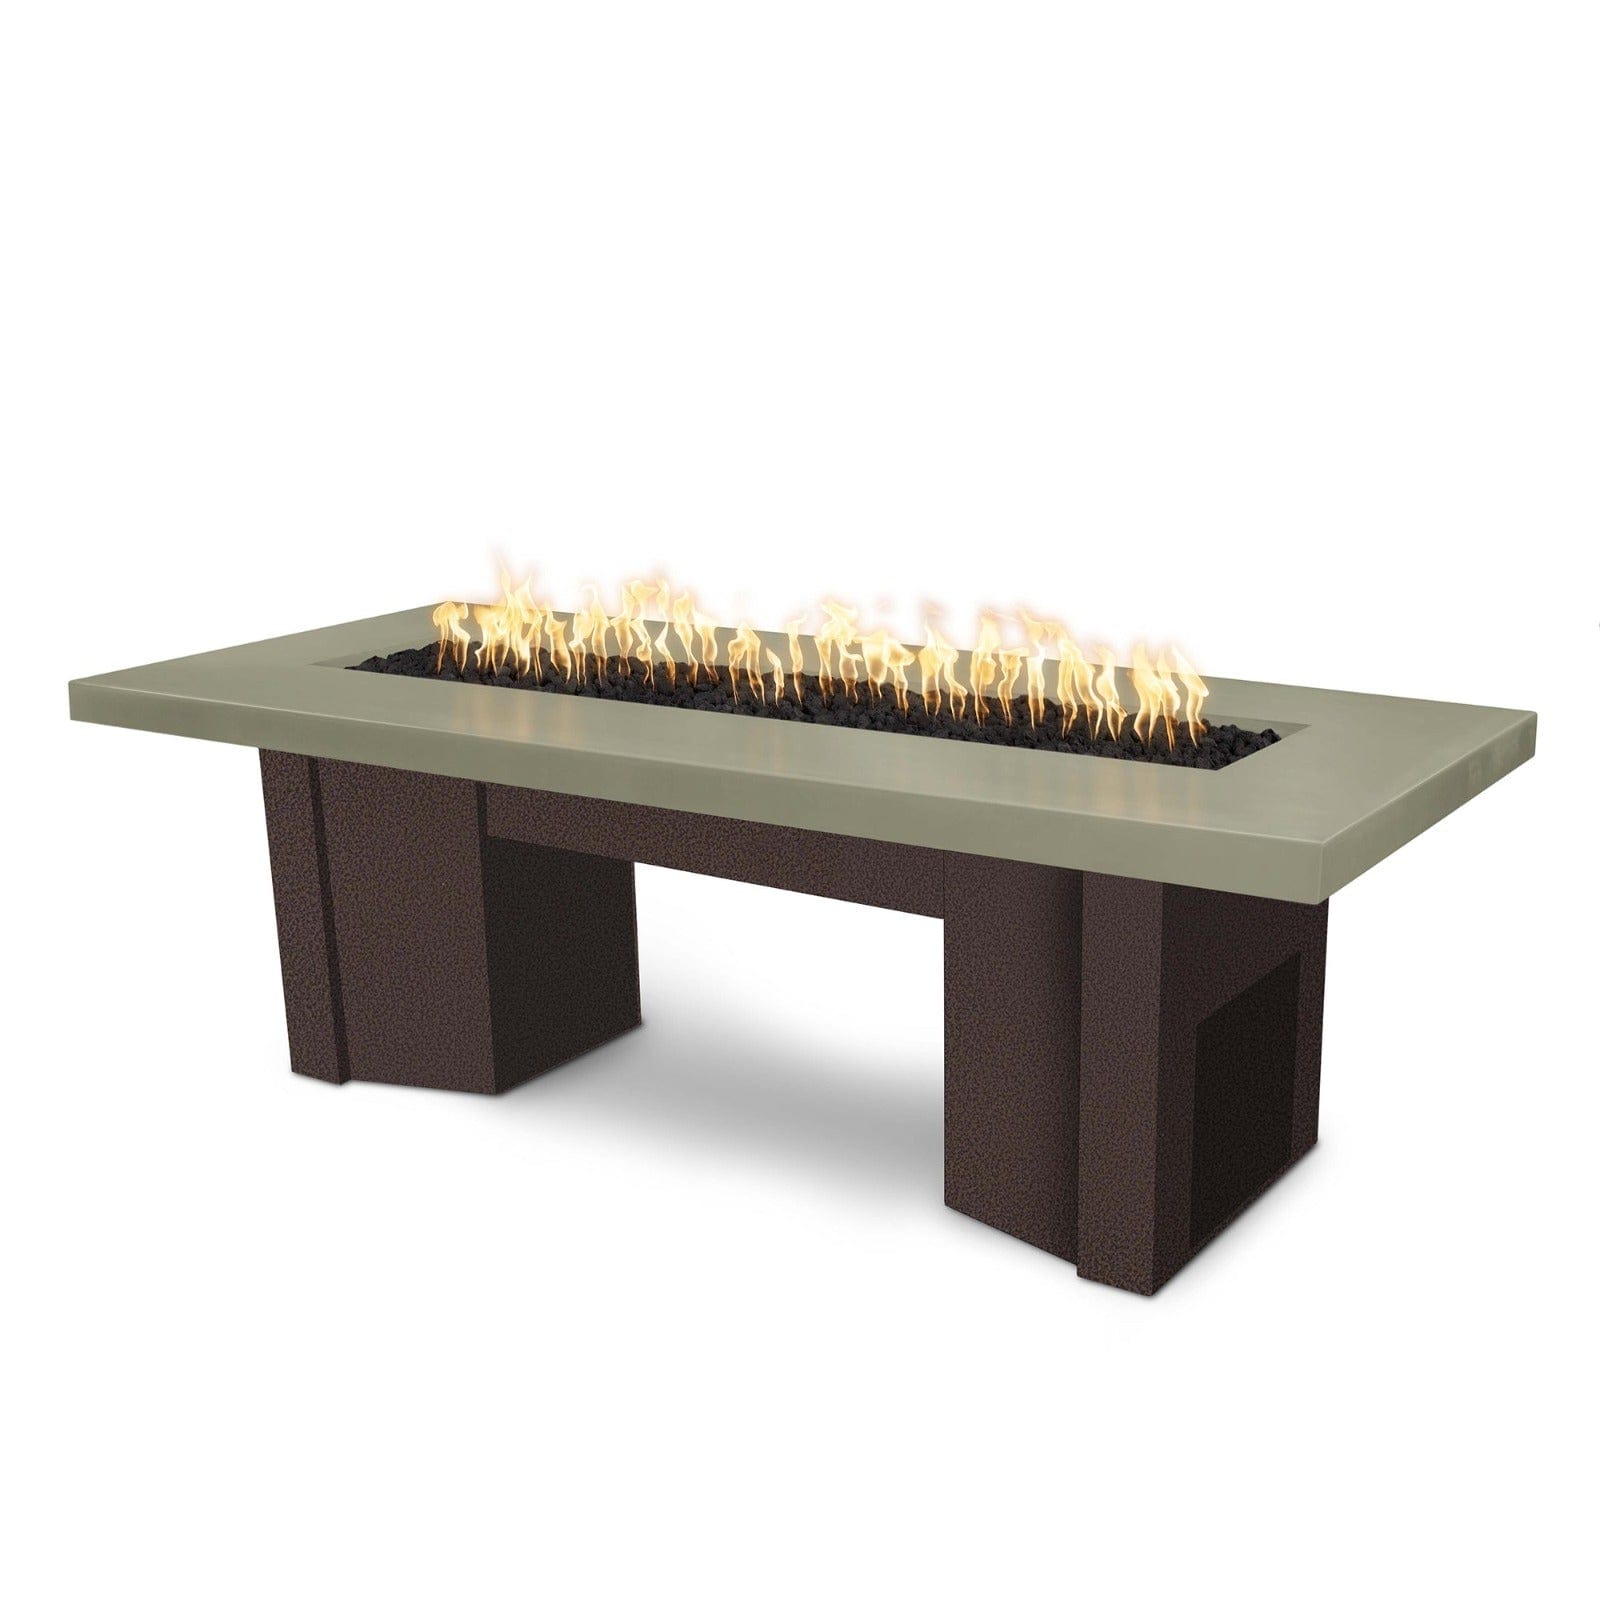 The Outdoor Plus Fire Features Ash (-ASH) / Copper Vein Powder Coated Steel (-CPV) The Outdoor Plus 78" Alameda Fire Table Smooth Concrete in Liquid Propane - Match Lit with Flame Sense System / OPT-ALMGFRC78FSML-LP